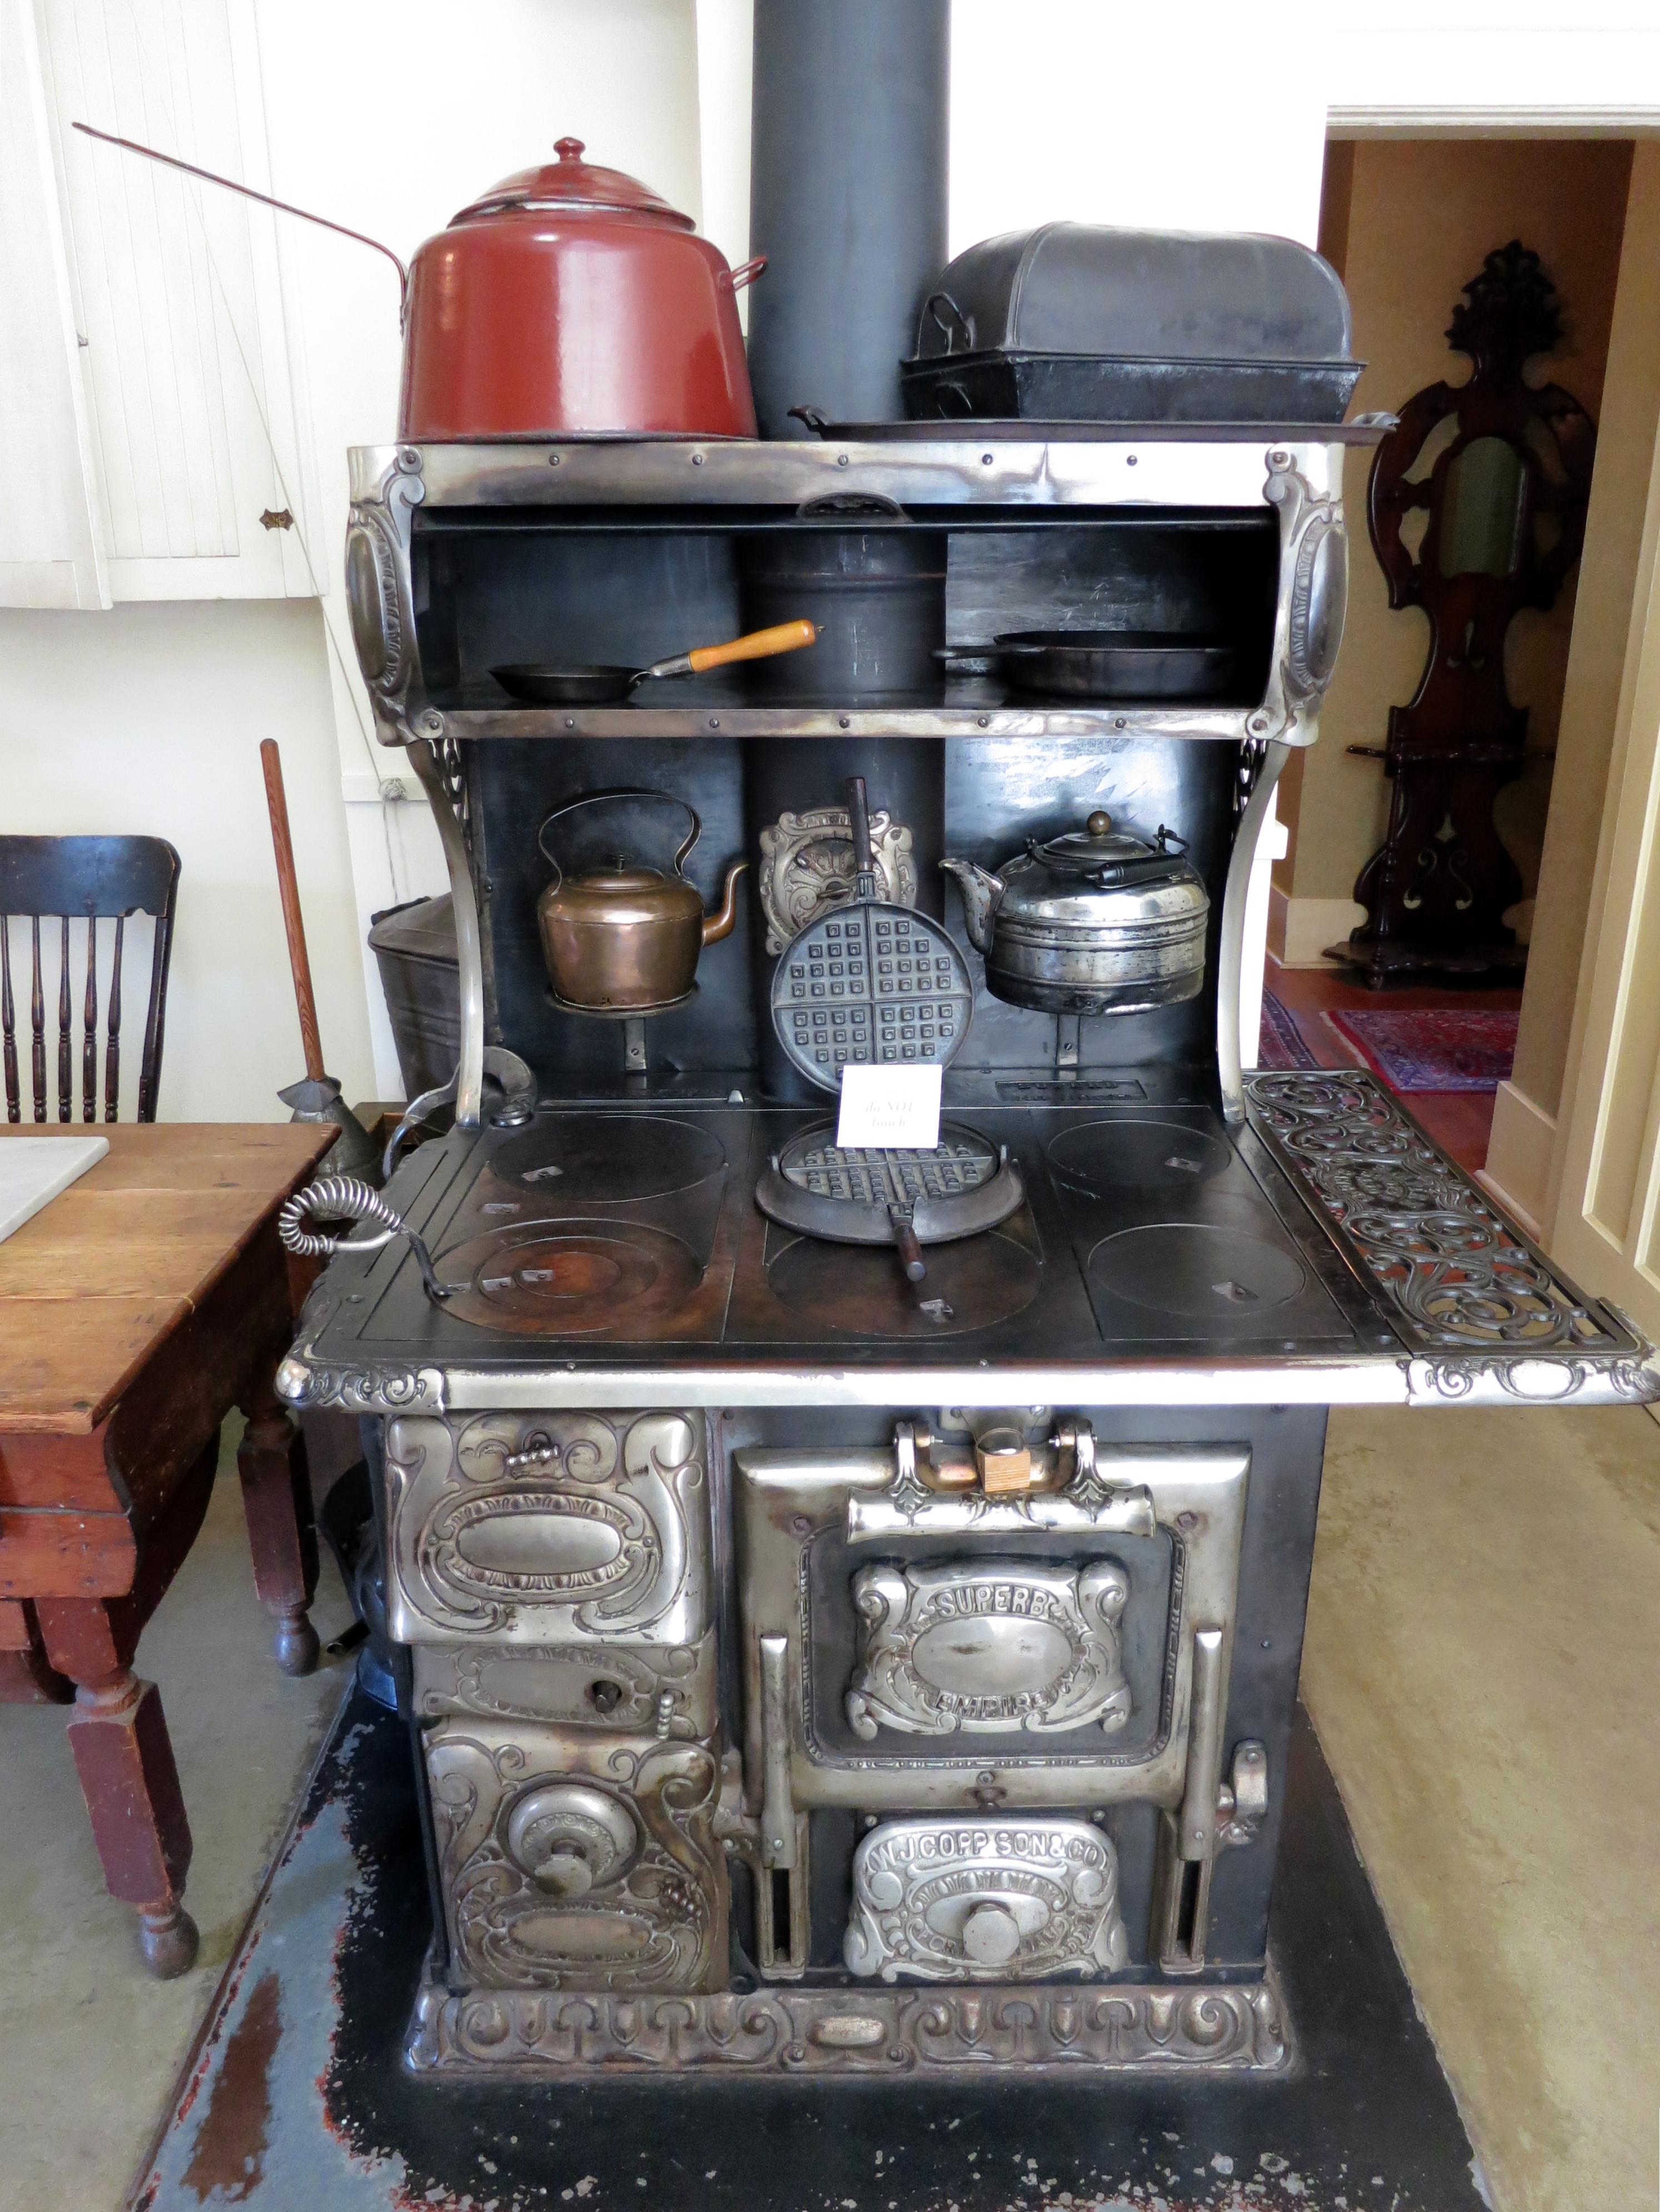 https://upload.wikimedia.org/wikipedia/commons/c/cf/Old-fashioned_cooking_range_at_Elworth_%287869006762%29.jpg